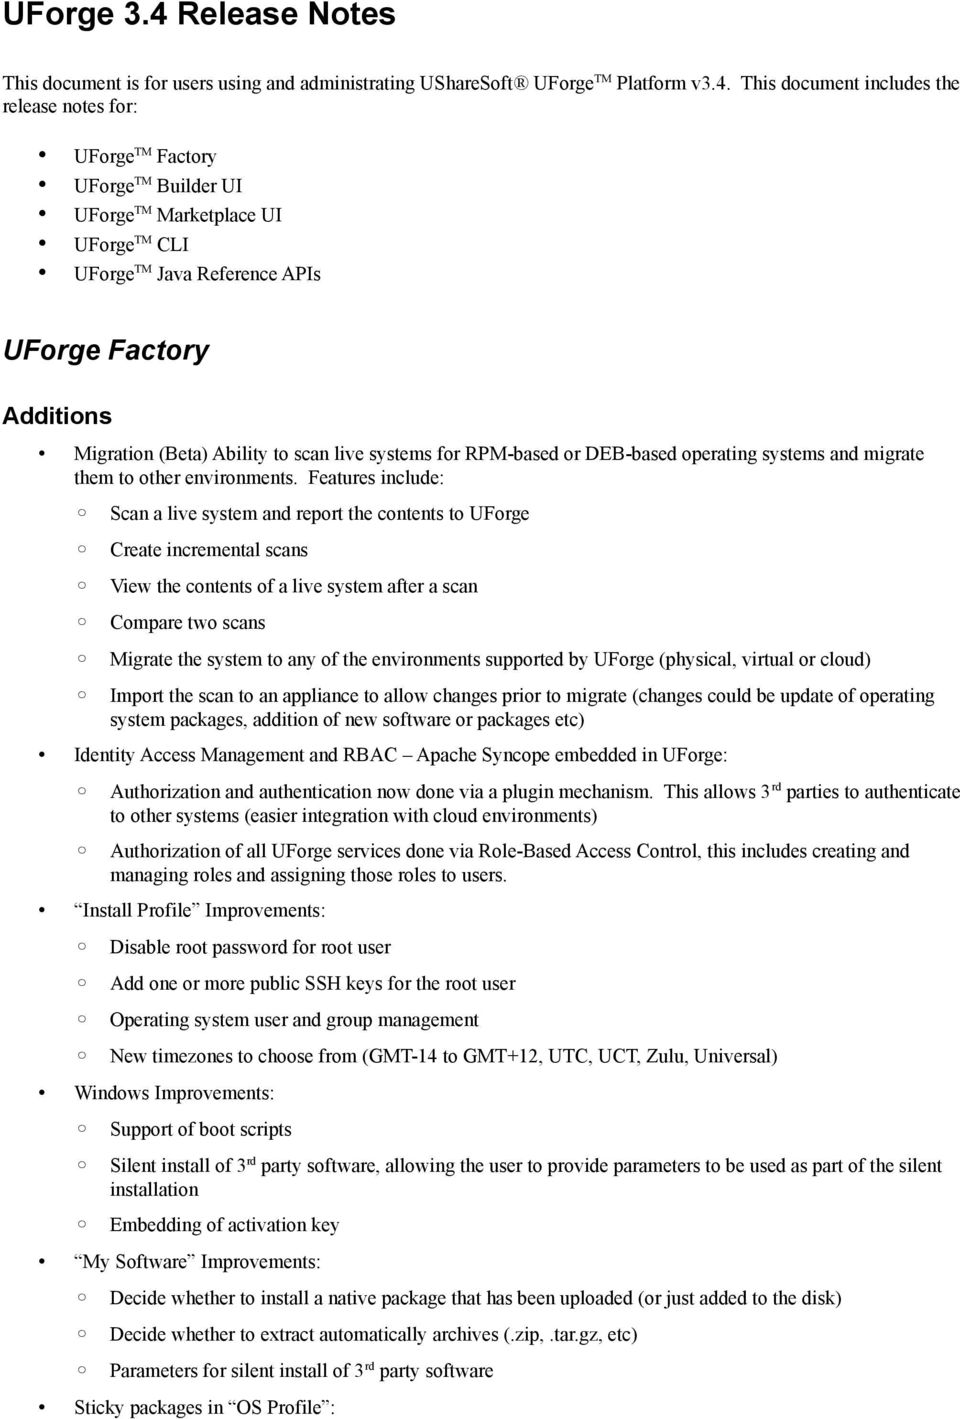 This document includes the release notes for: UForge TM Factory UForge TM Builder UI UForge TM Marketplace UI UForge TM CLI UForge TM Java Reference APIs UForge Factory Migration (Beta) Ability to